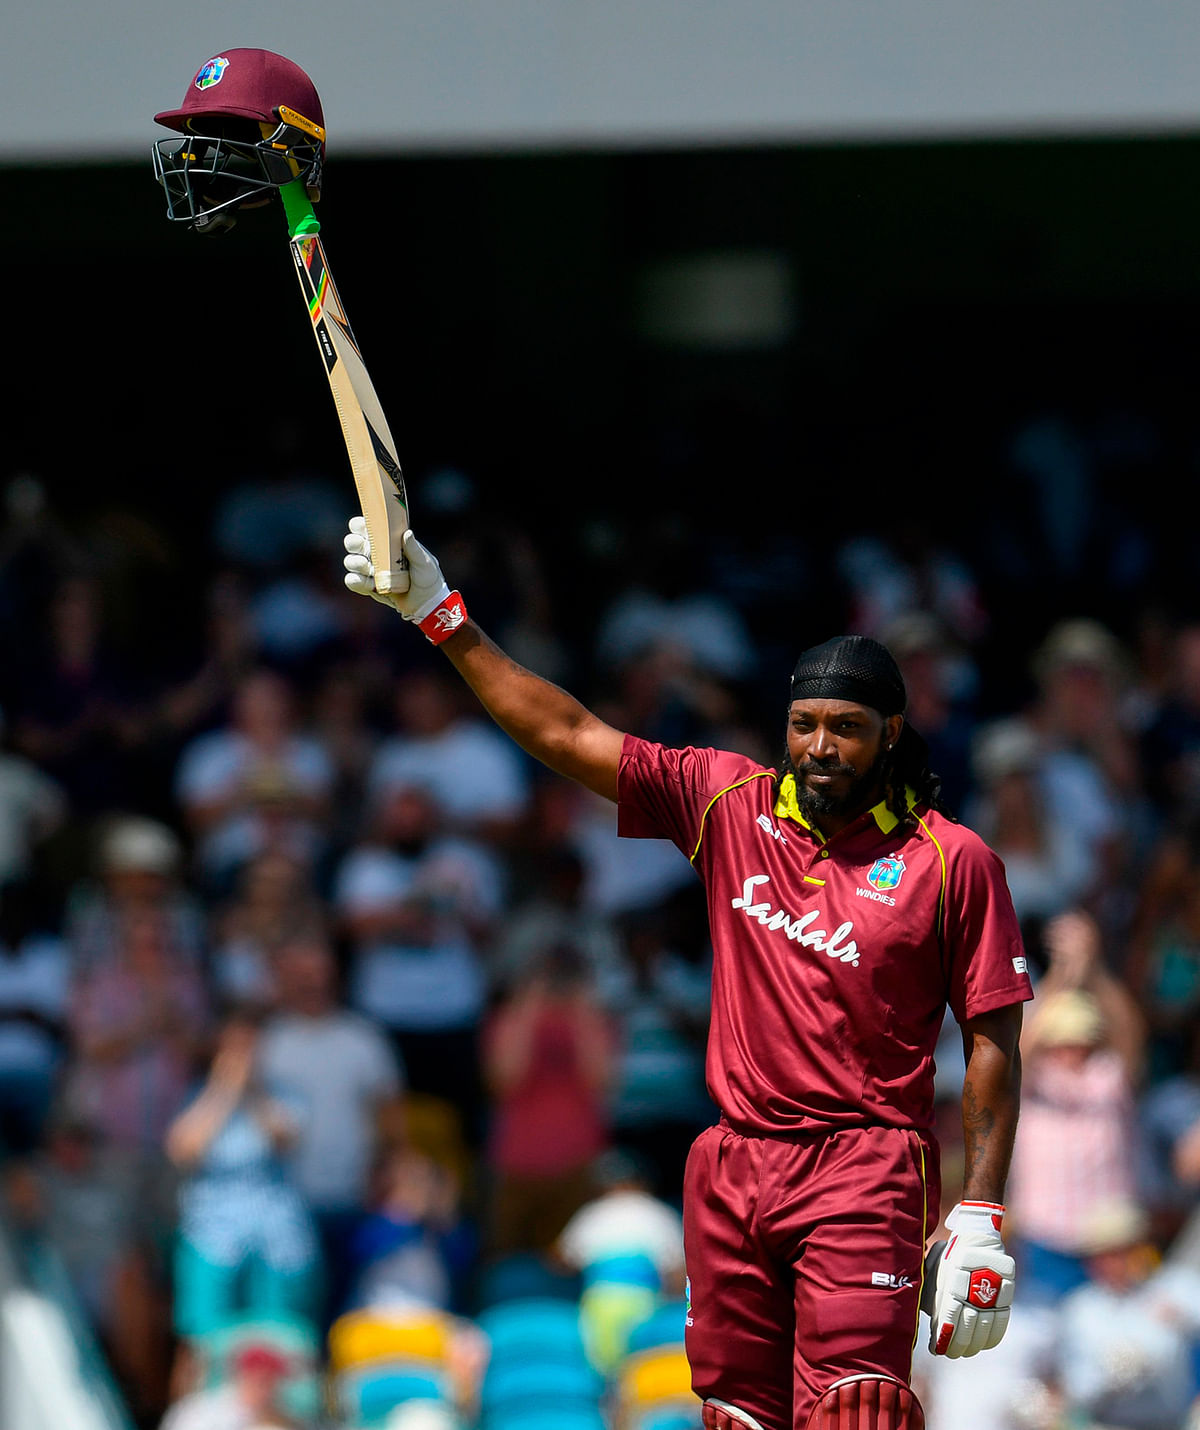 Chris Gayle (R) of West Indies celebrates his century during the 1st ODI between West Indies and England at Kensington Oval, Bridgetown, Barbados, on 20 February 2019. Photo: AFP